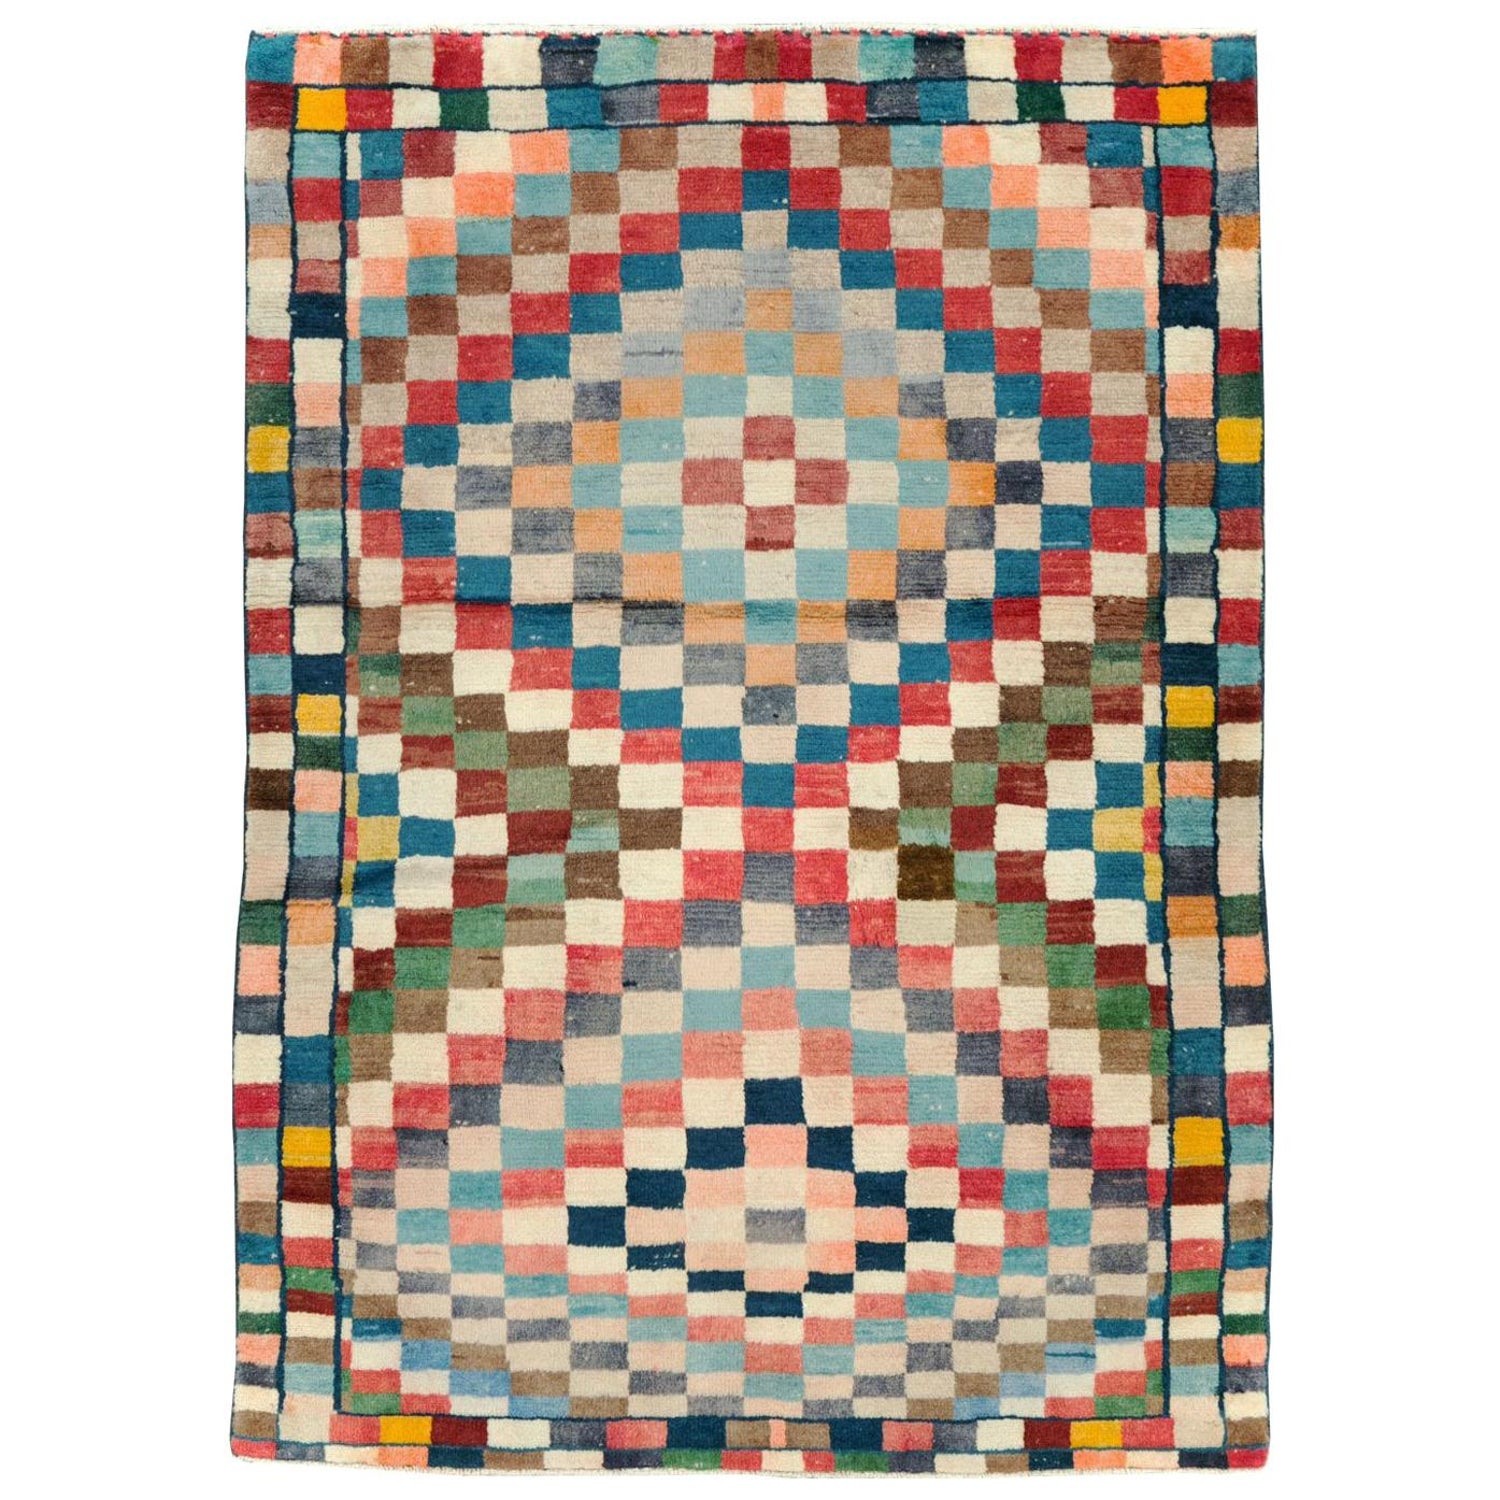 Mid-20th Century Colorful Handmade Persian Gabbeh Checkerboard Throw Rug  For Sale at 1stDibs